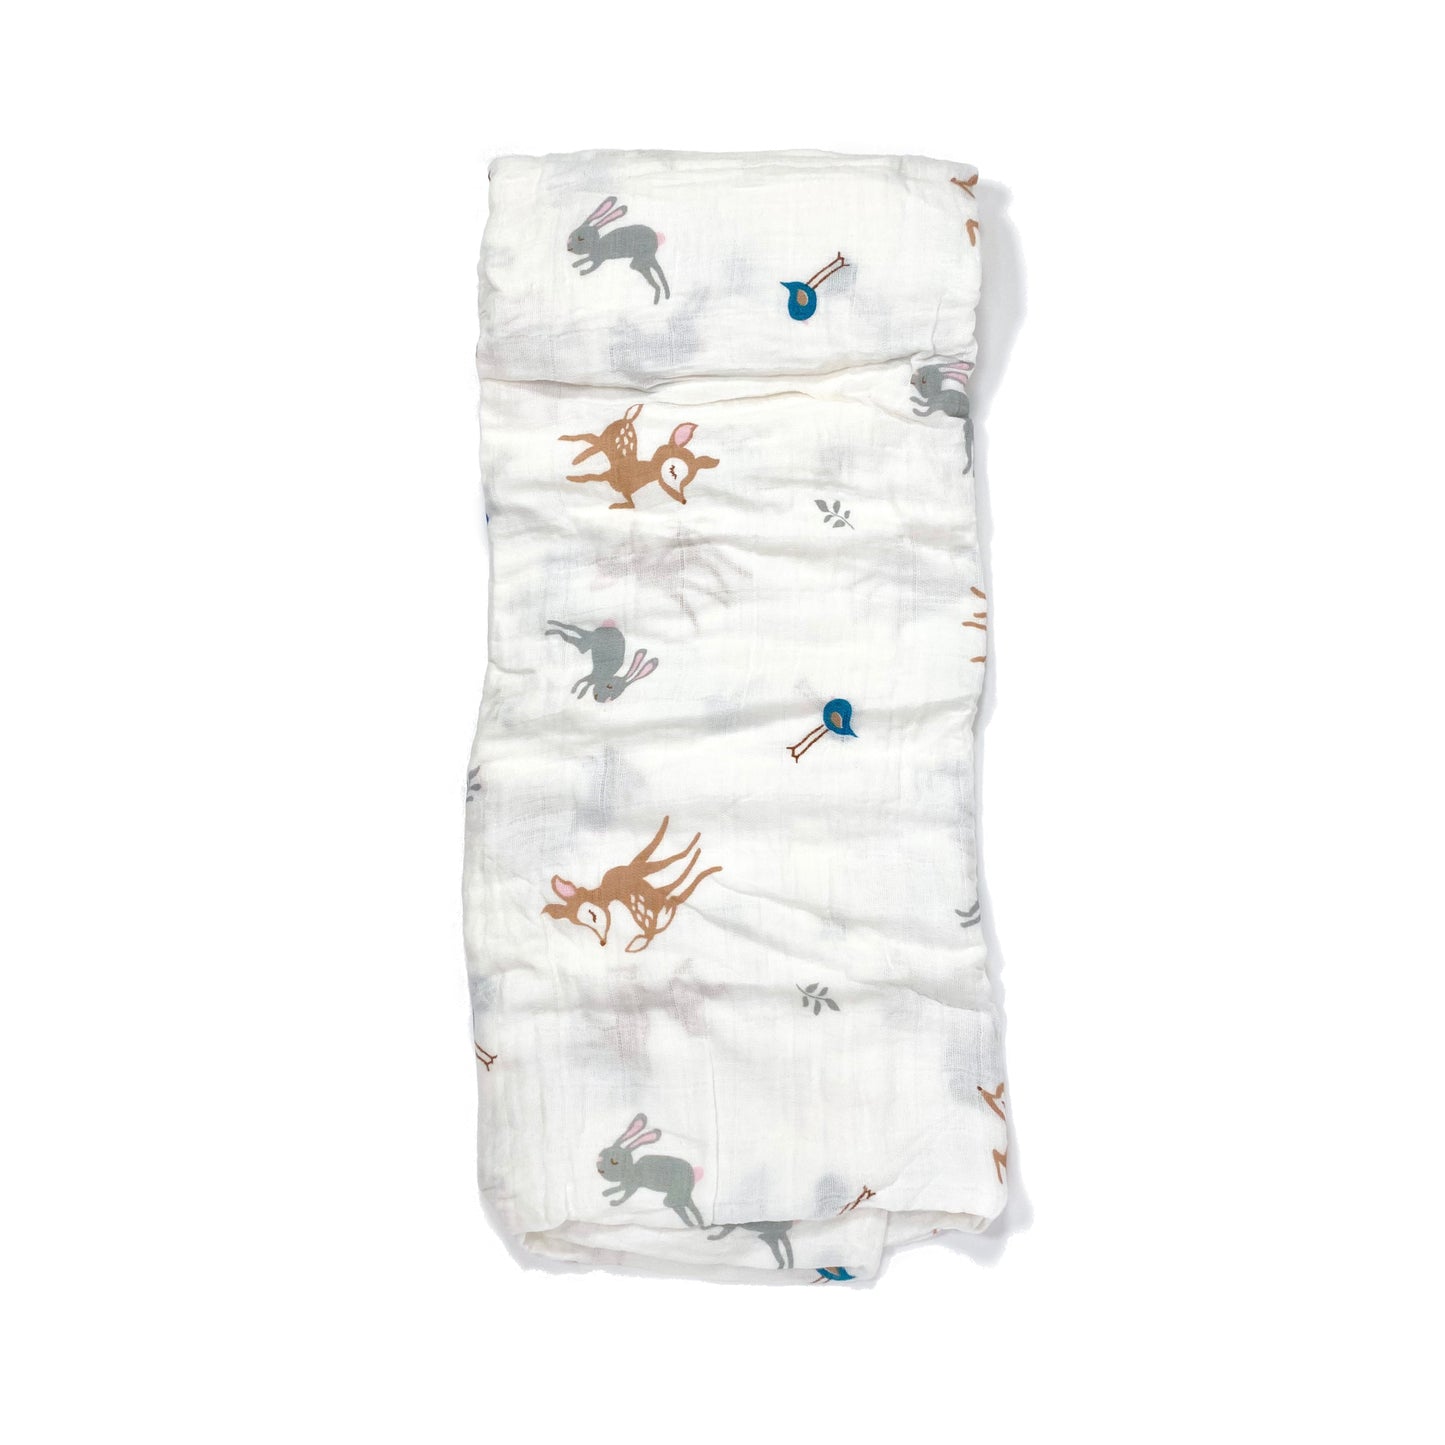 A folded muslin swaddle blanket with a cute woodland design.